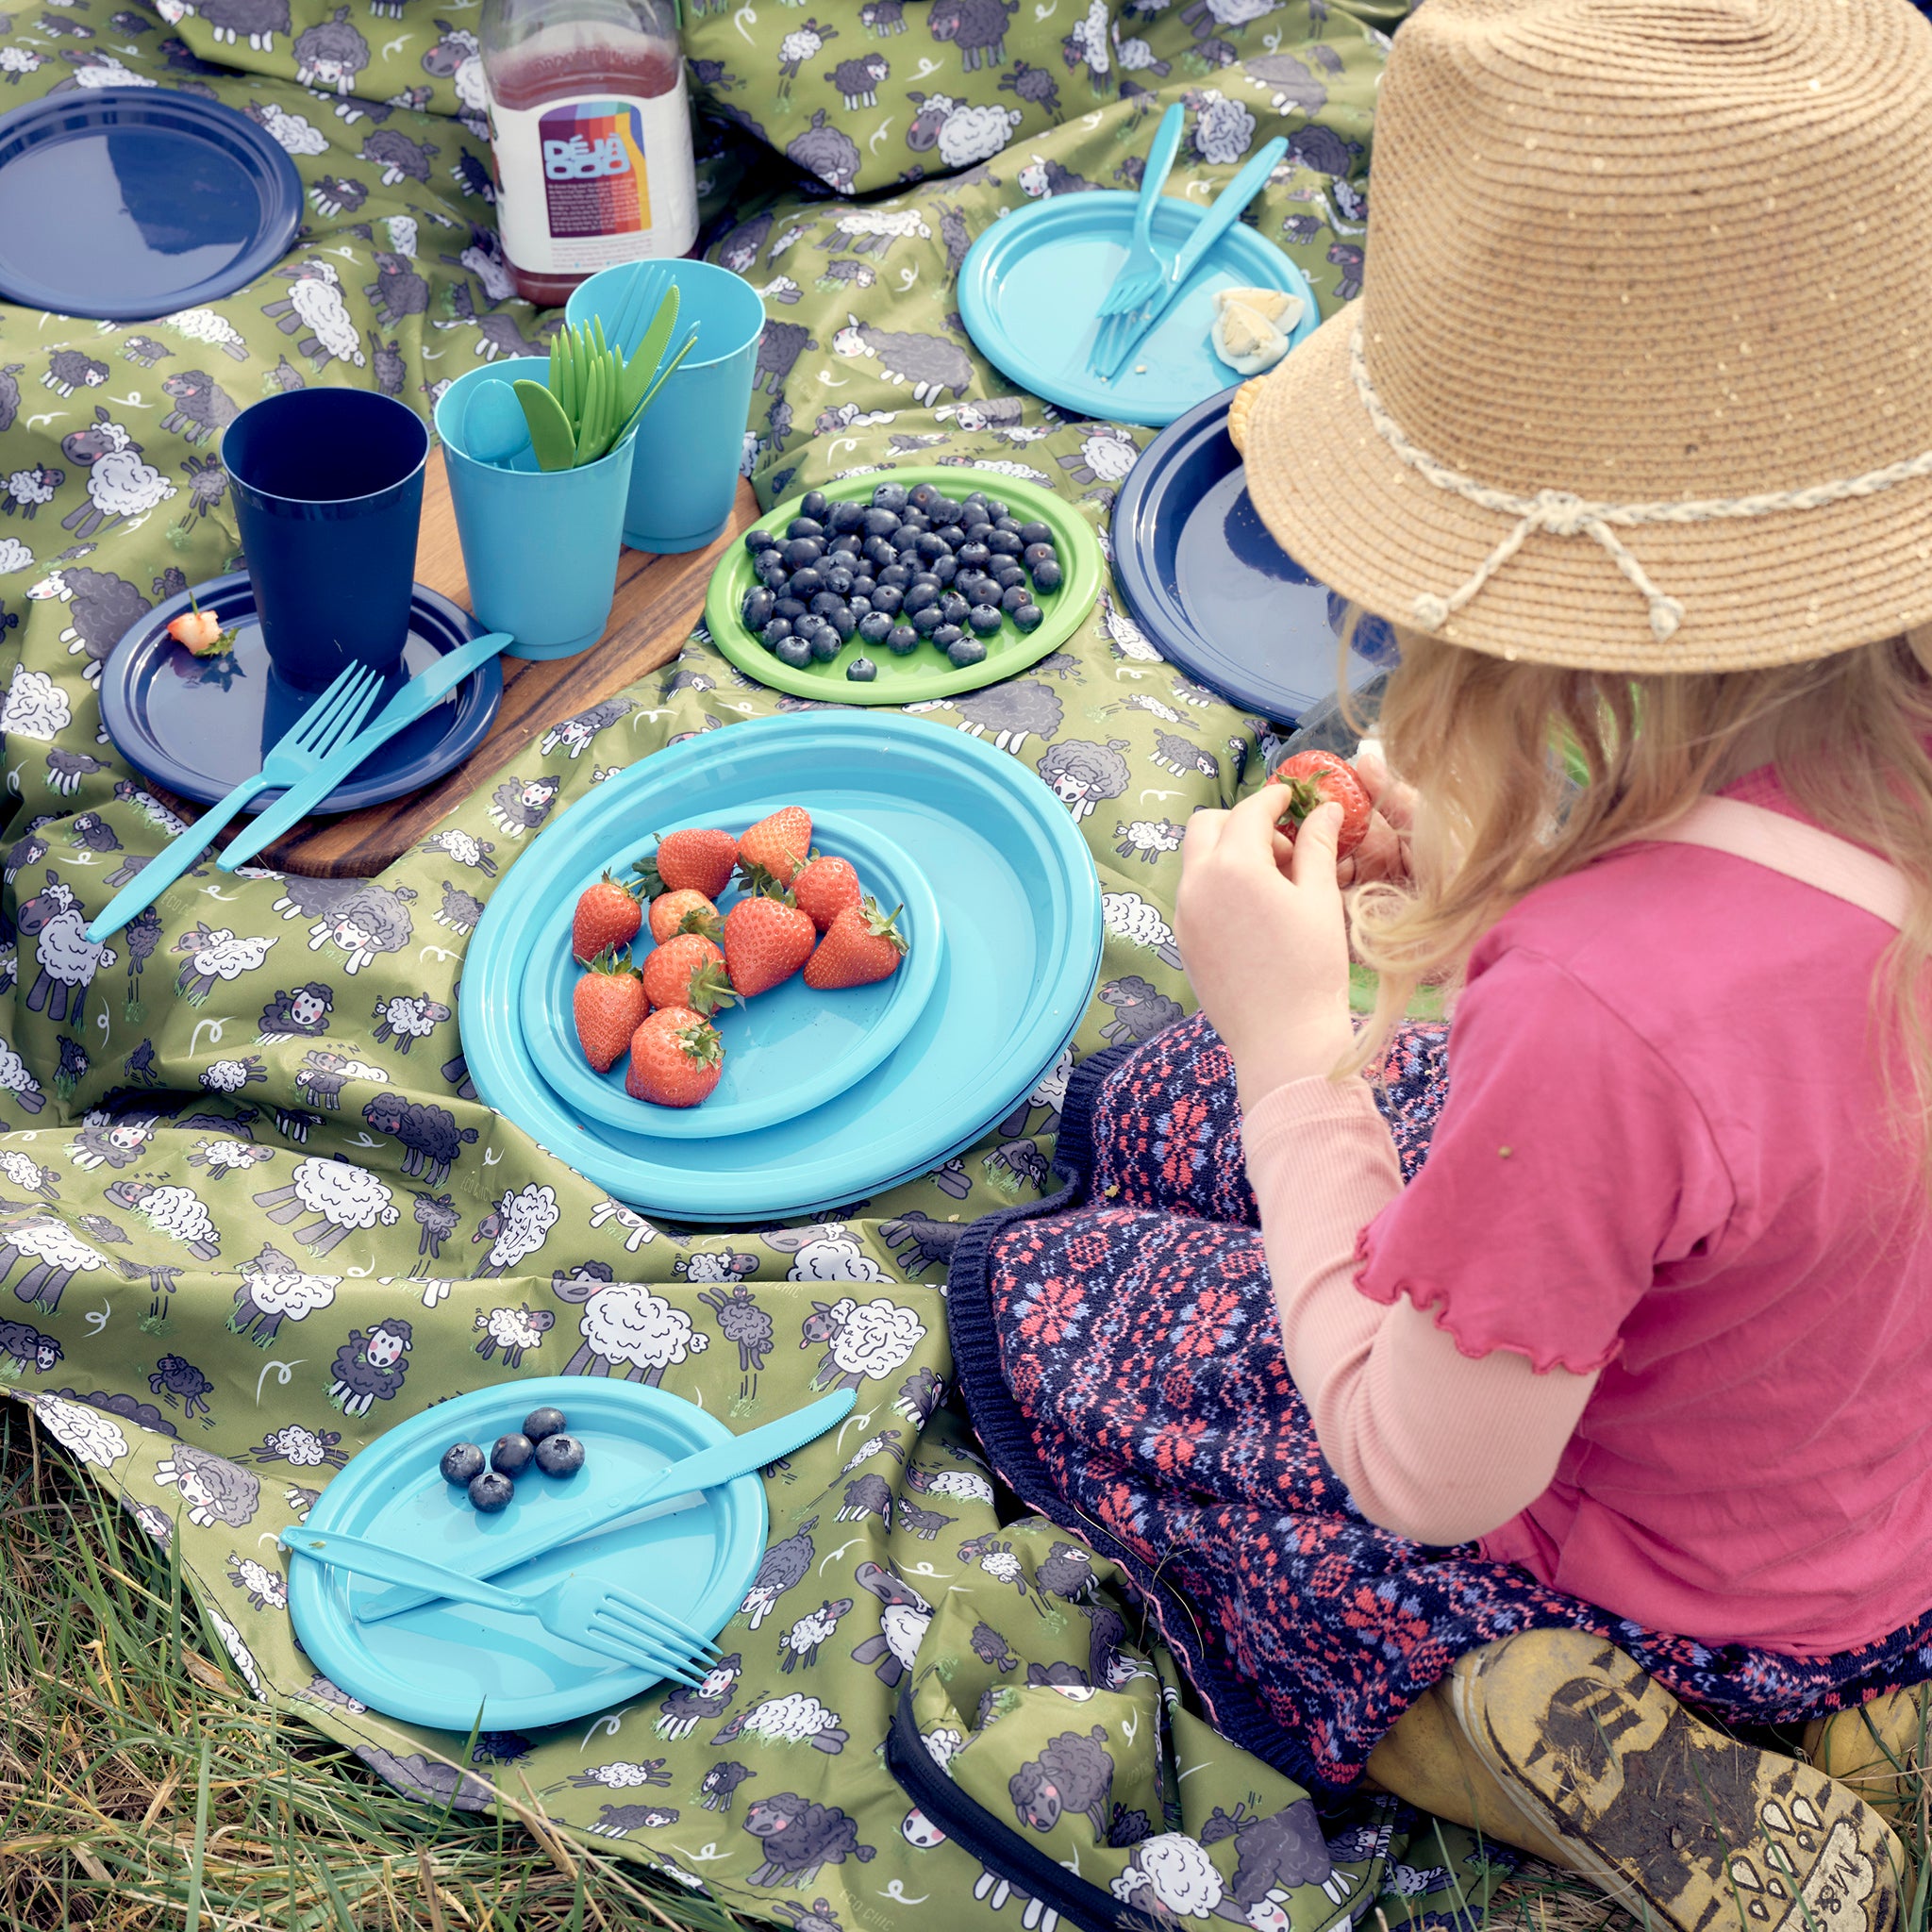 picnic set made of recycled plastic